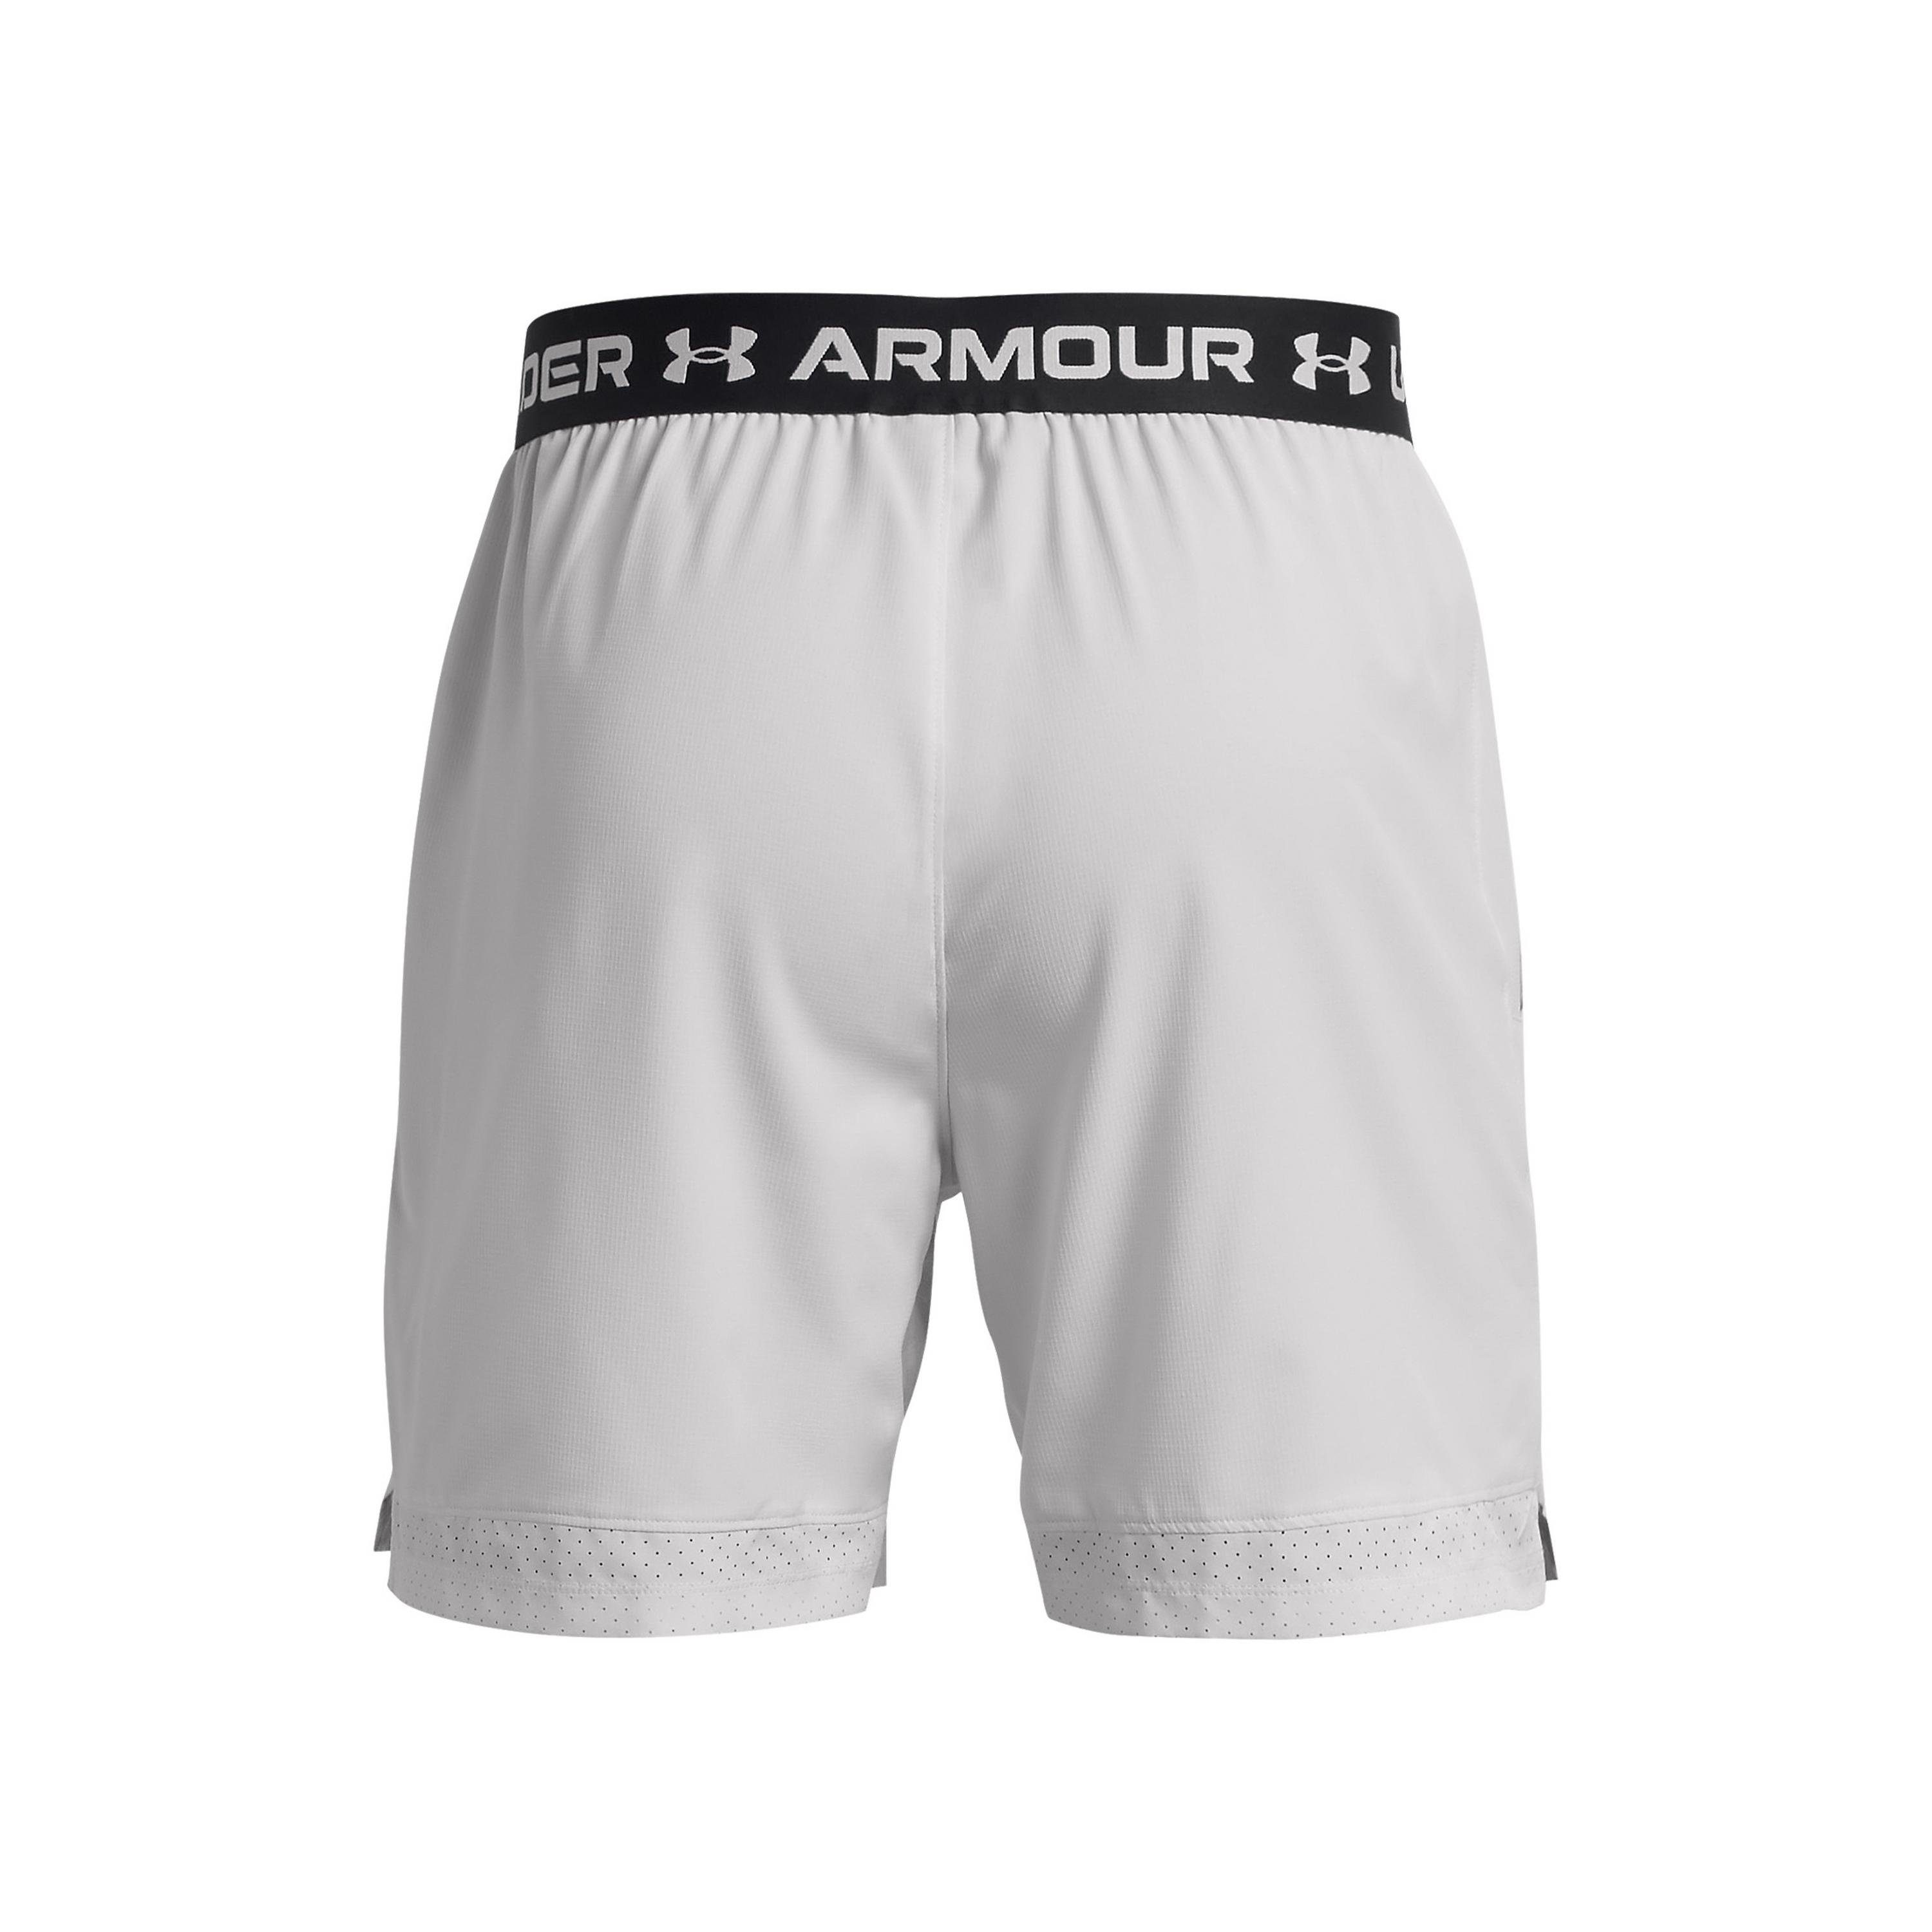 Halo Gray Funktionsshorts Woven Vanish 014 Under Armour®